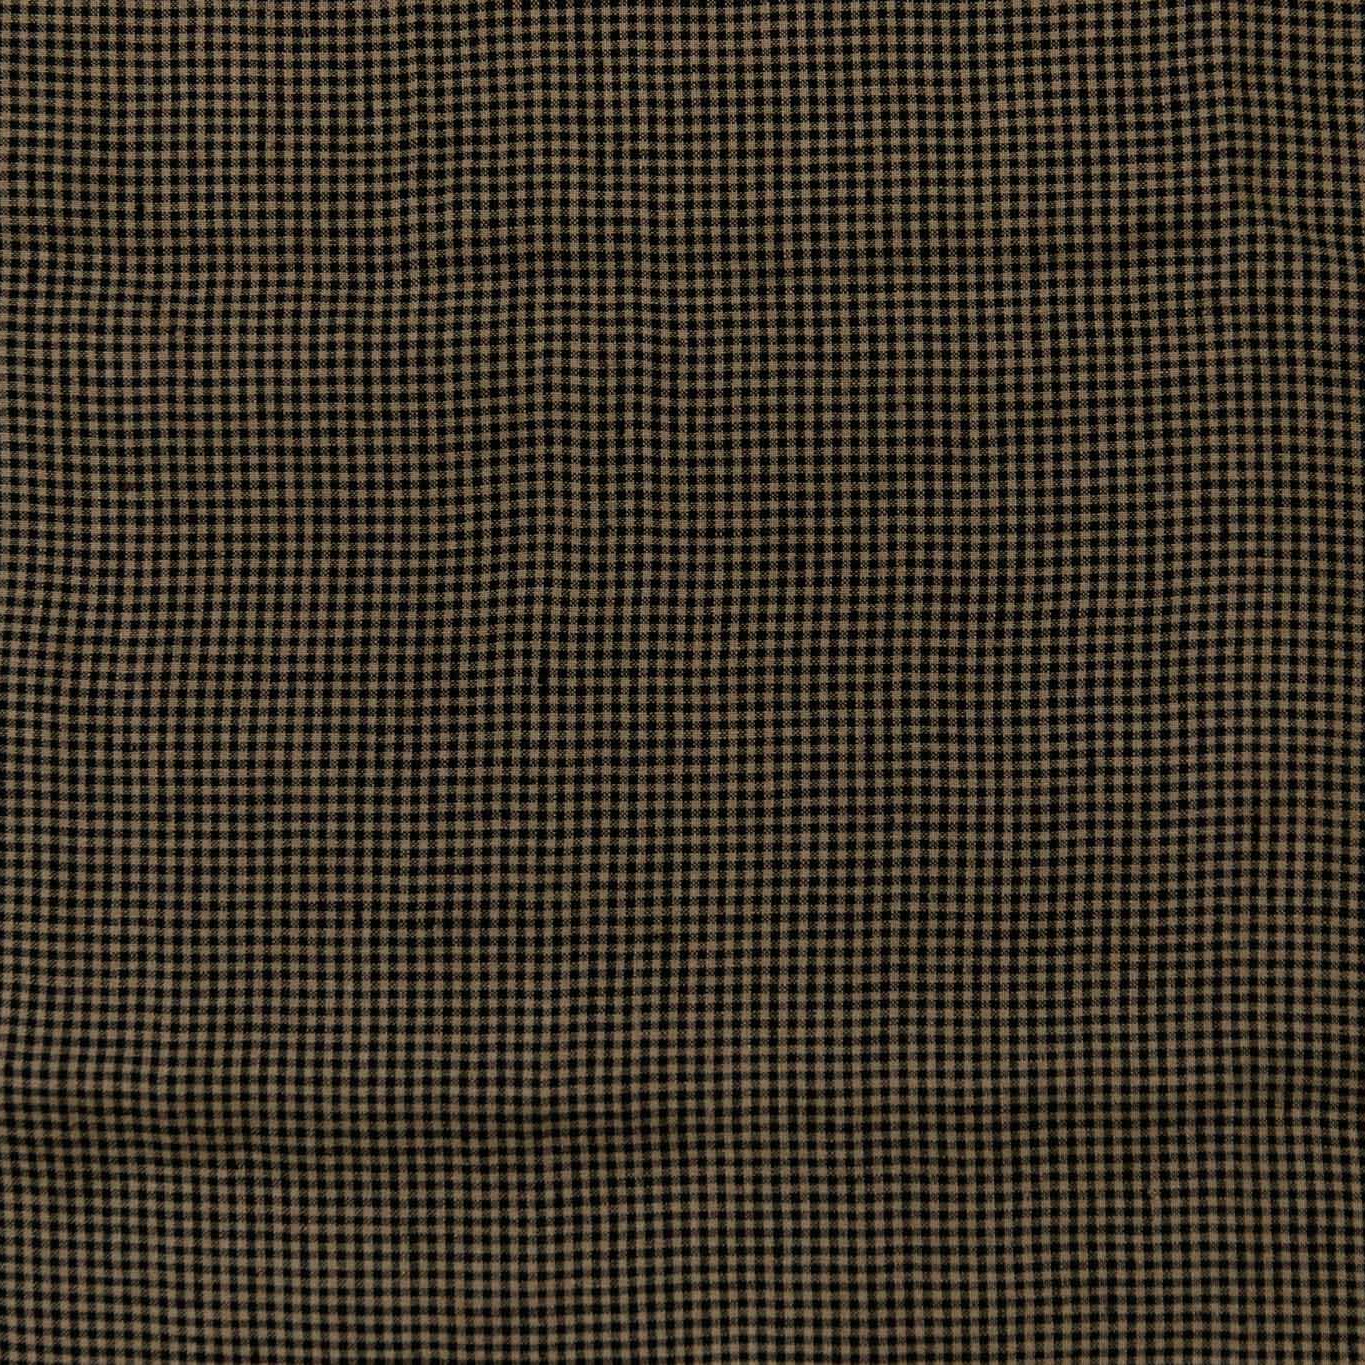 Yarn dyed checked linen - Black/Brown - 1/4m